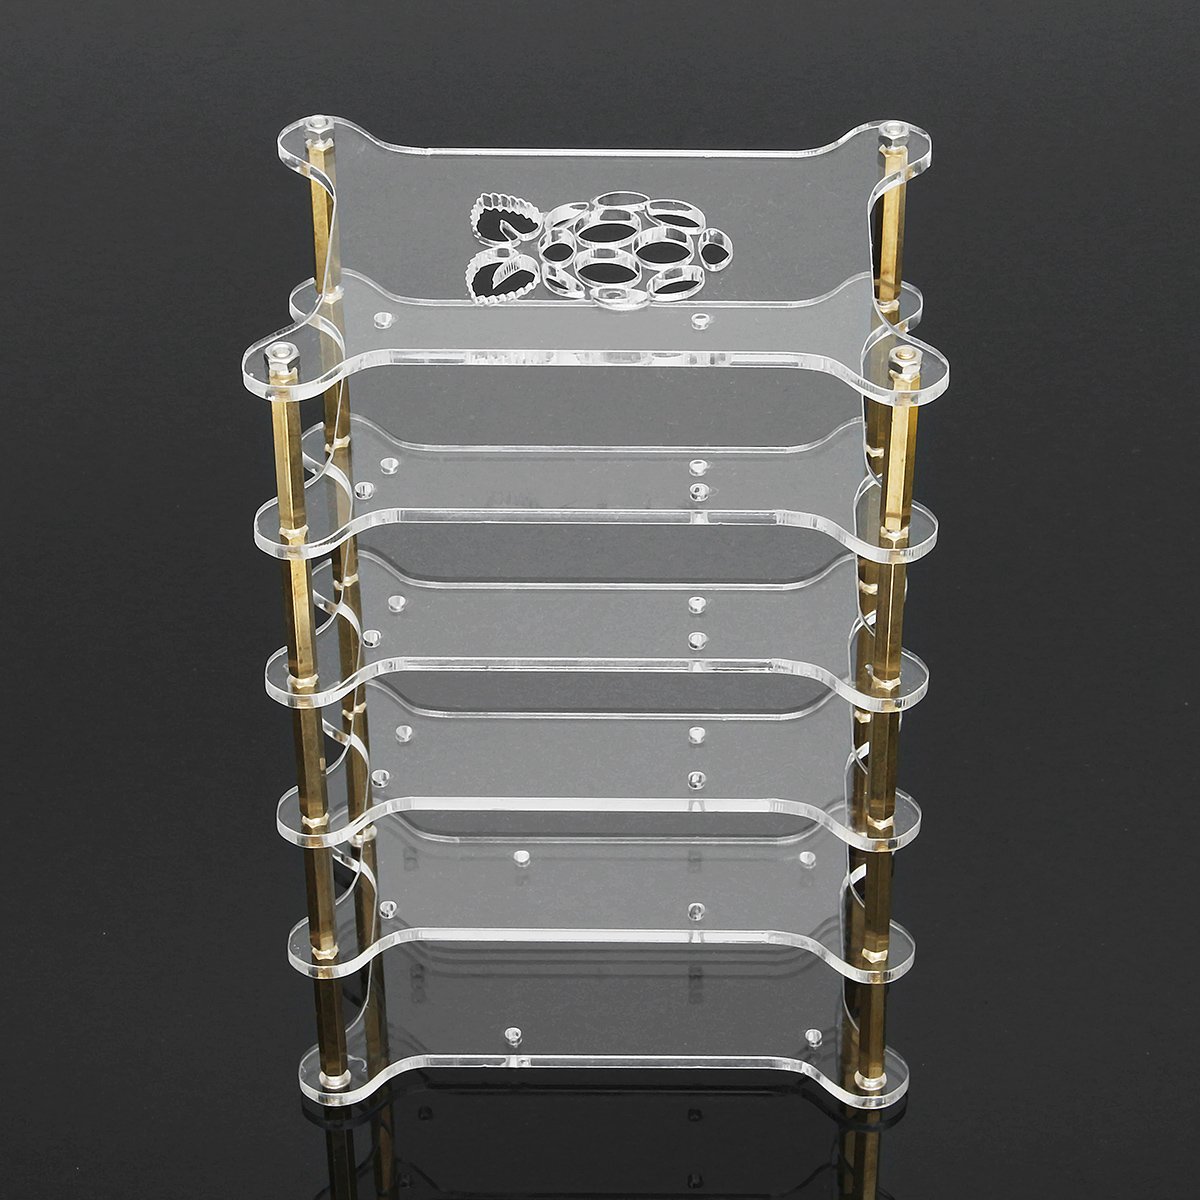 Clear Acrylic 5 Layer Cluster Case Shelf Stack For Raspberry Pi 3/2 B and B+ 2